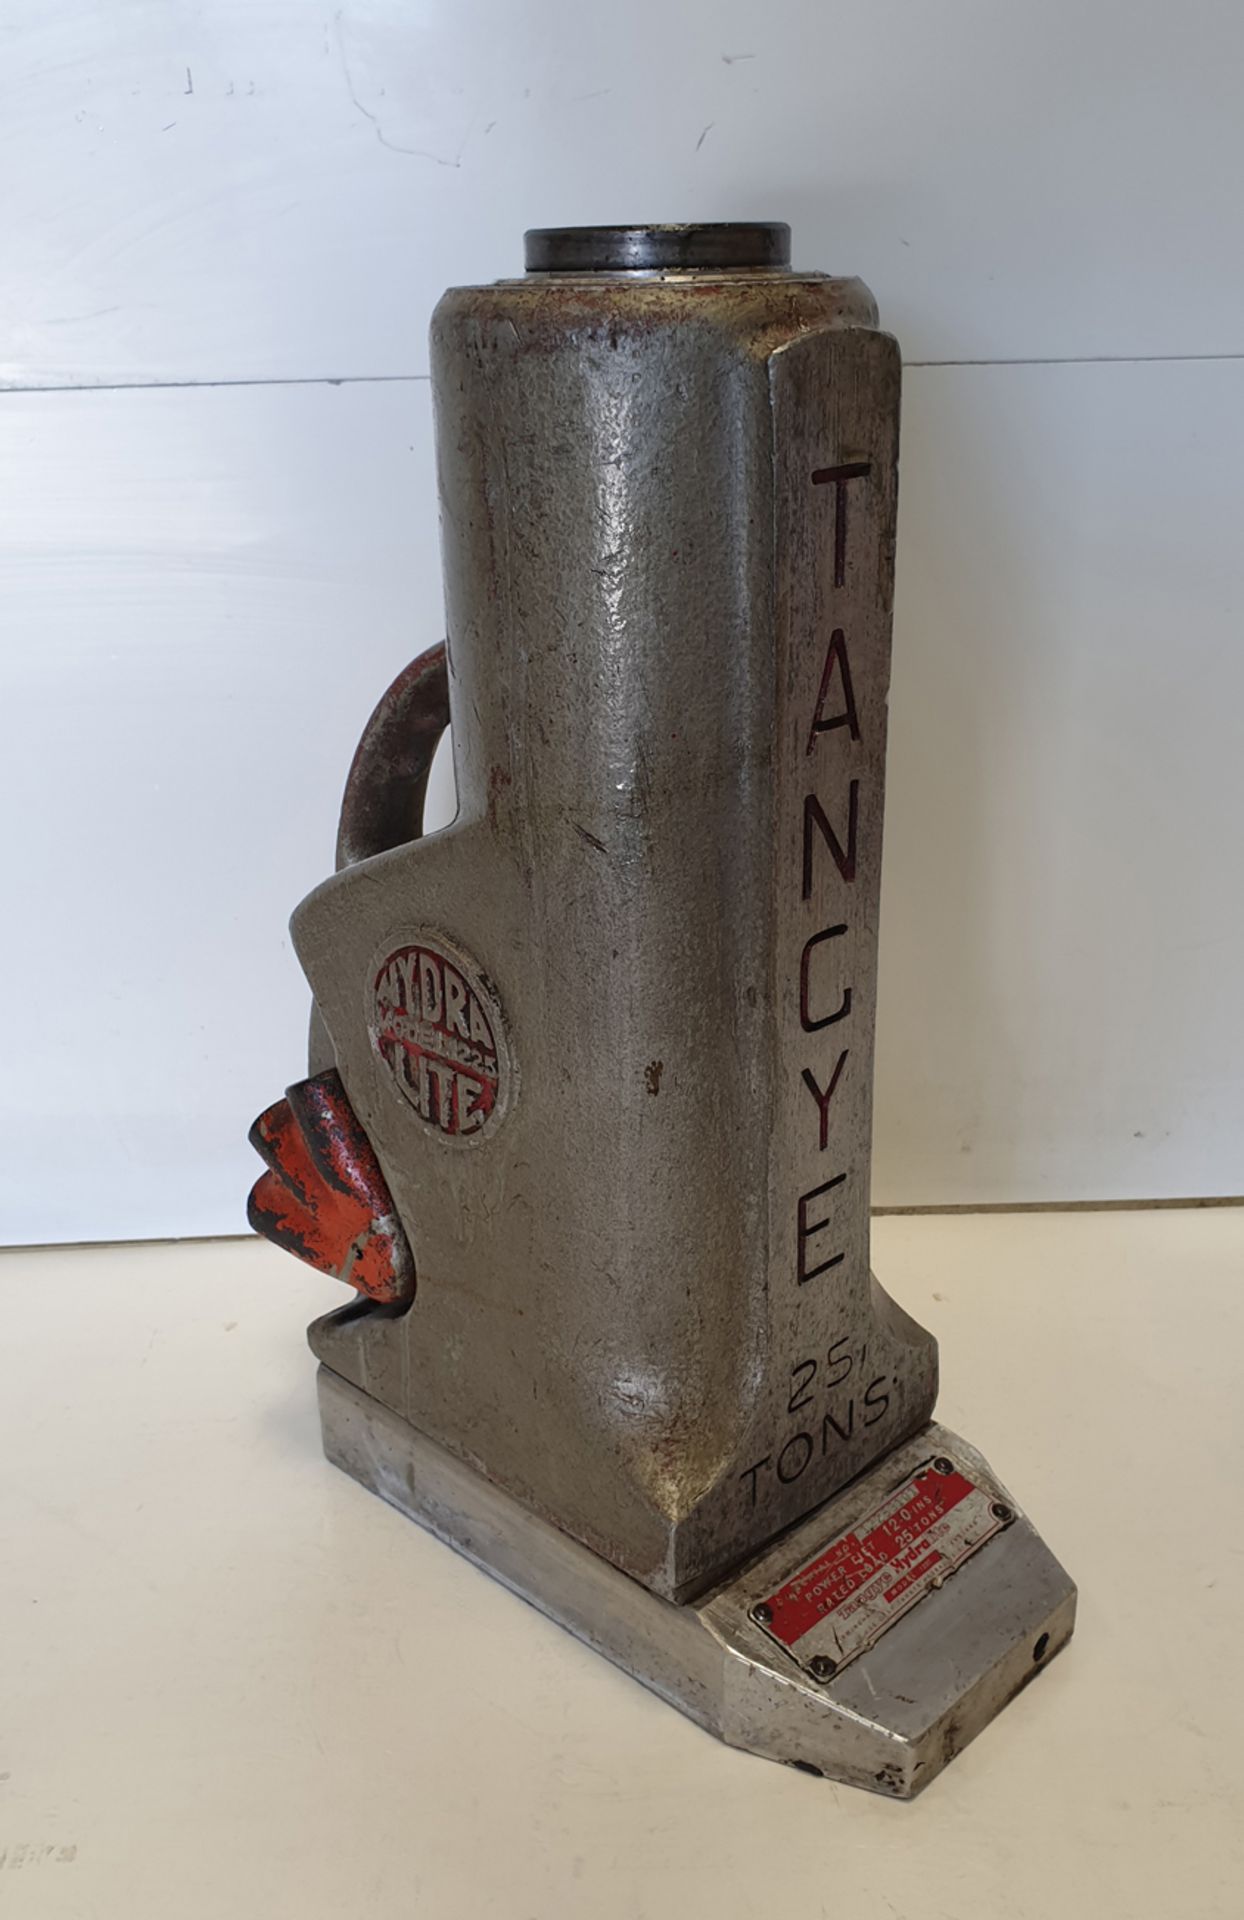 Tangye Hydralite Model 1225 Hydraulic Jack. Power Lift 12". Rated Load 25 Tons.